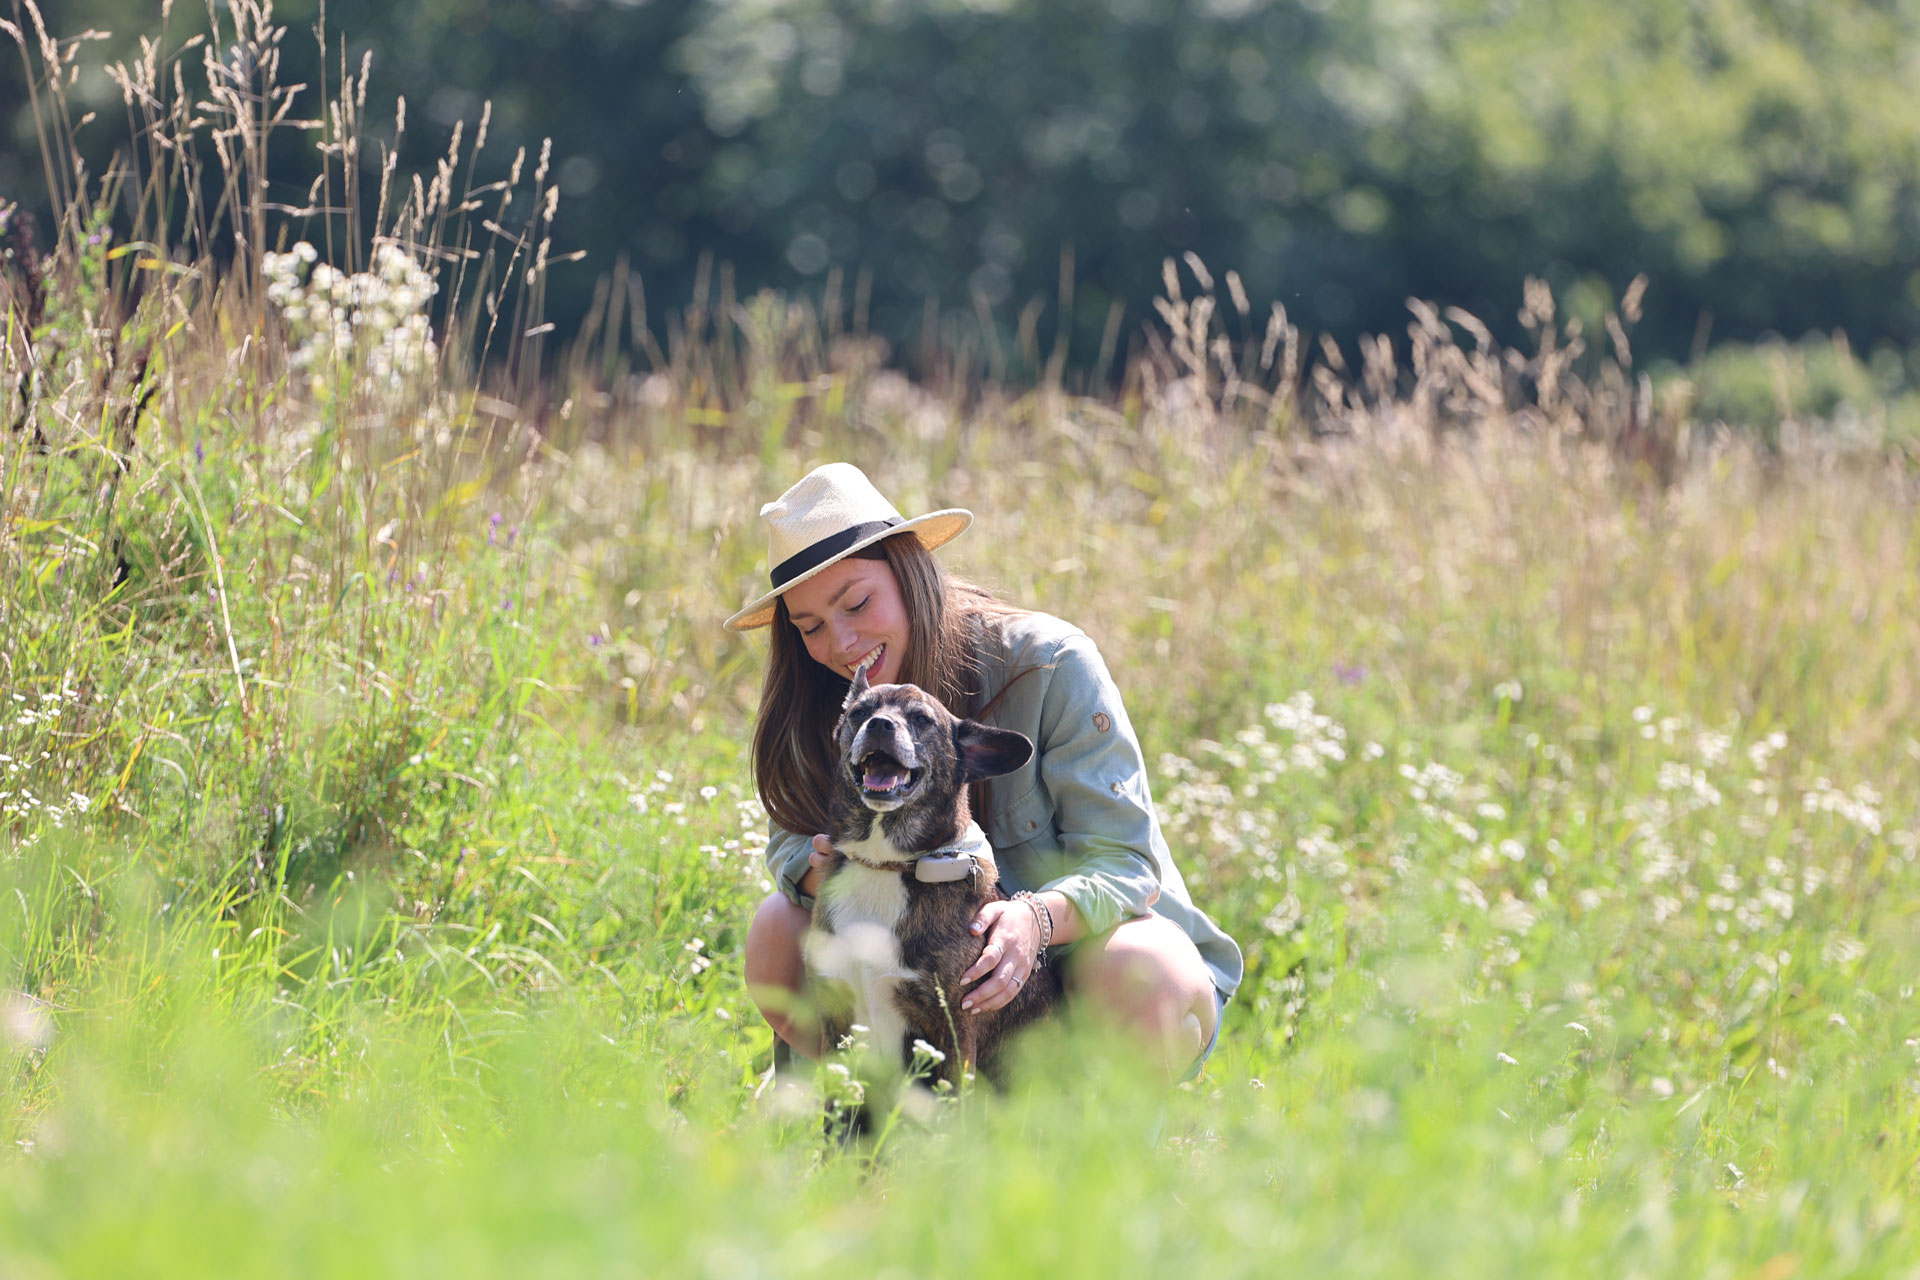 dog wearing gps tracker and young woman kneeling down in a grassy meadow or field